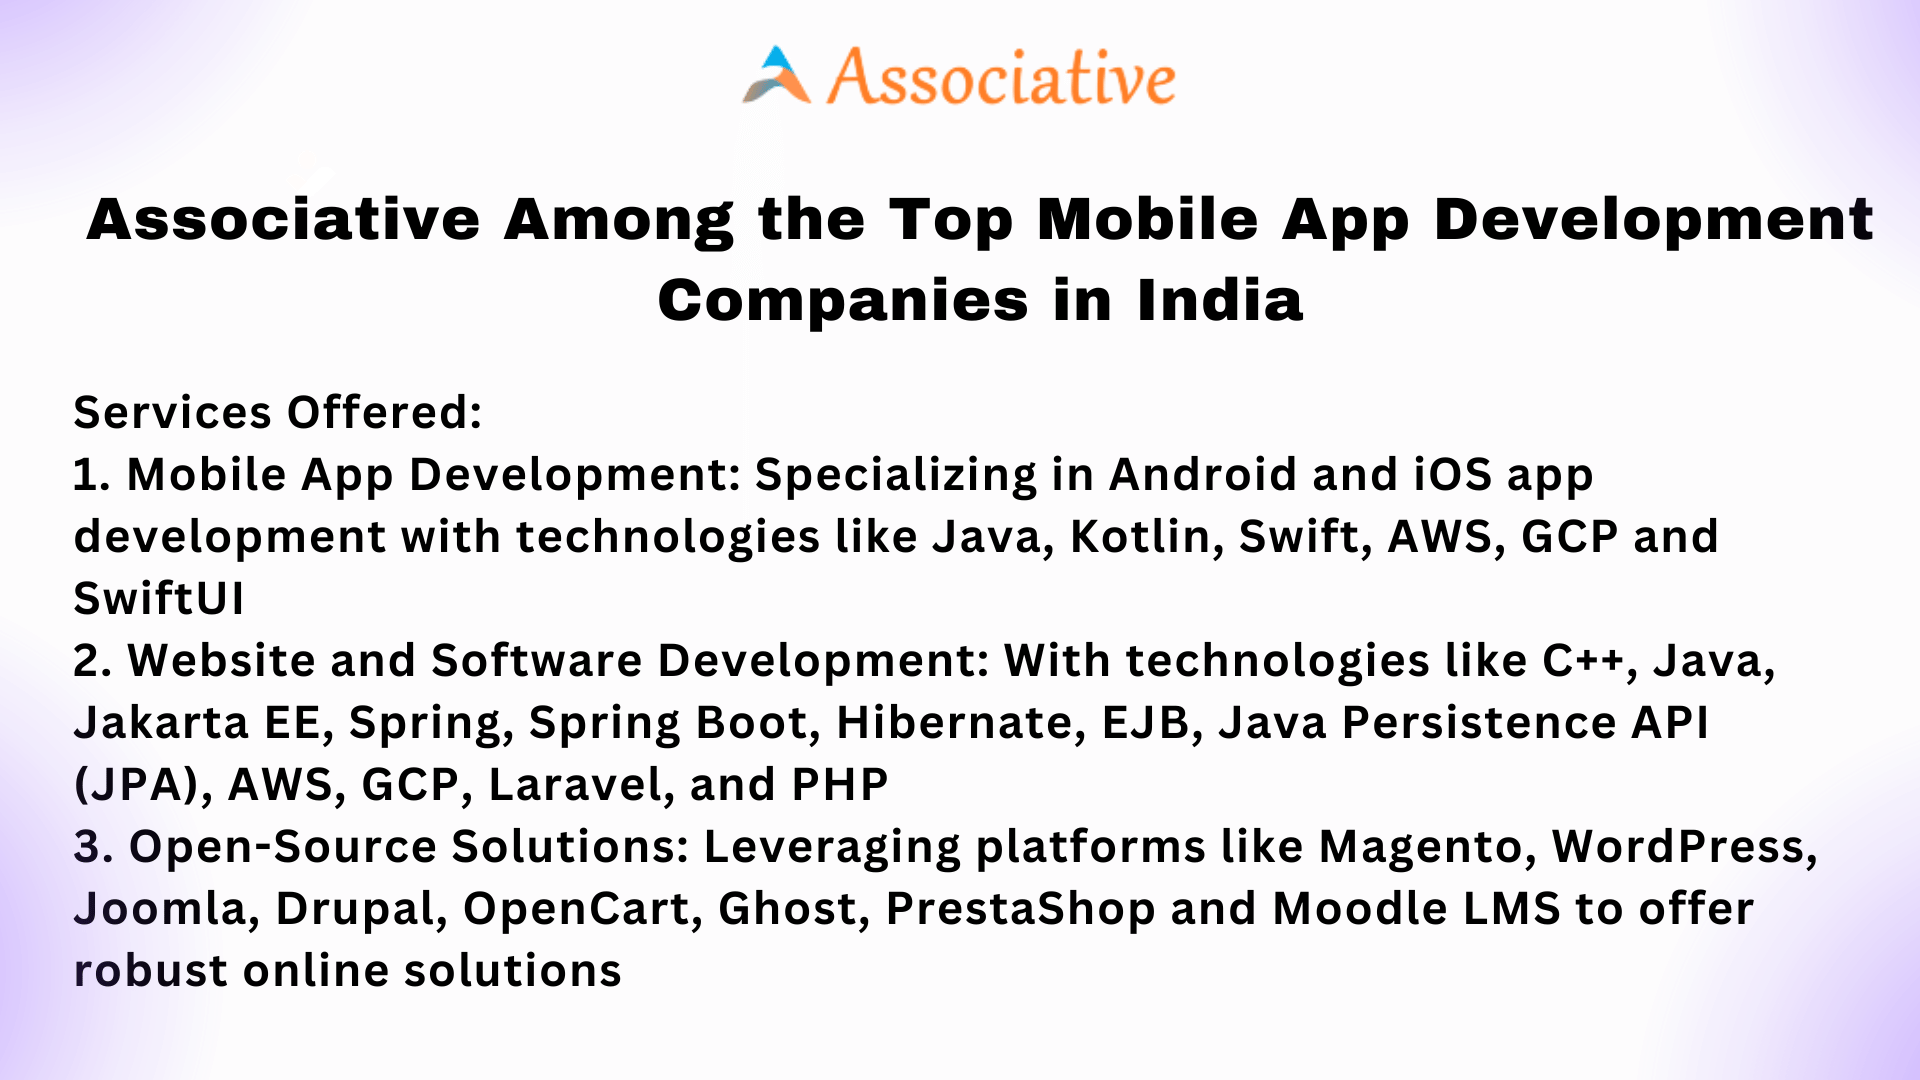 Associative Among the Top Mobile App Development Companies in India